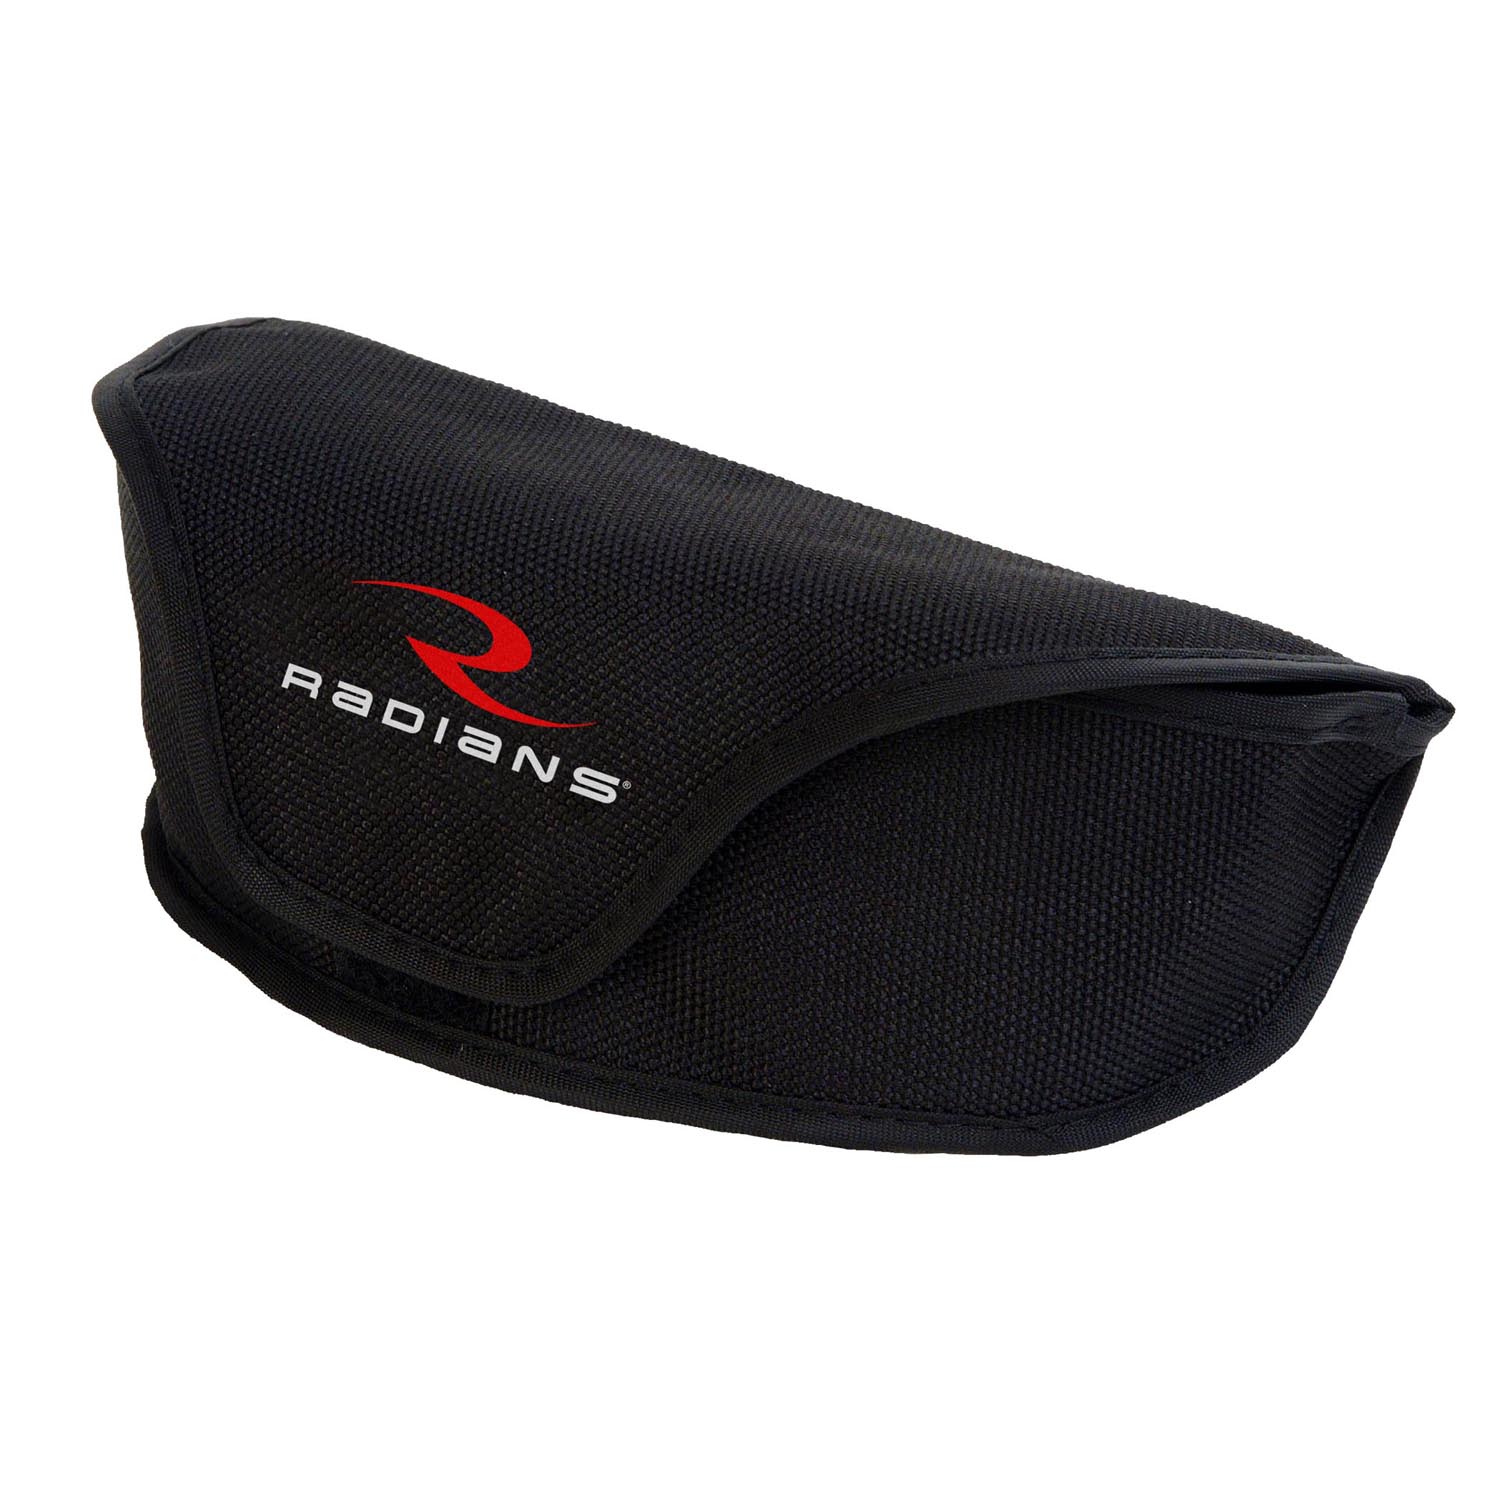 3 Pocket Eyewear Pouch with Logo - Black - Cases/Pouches